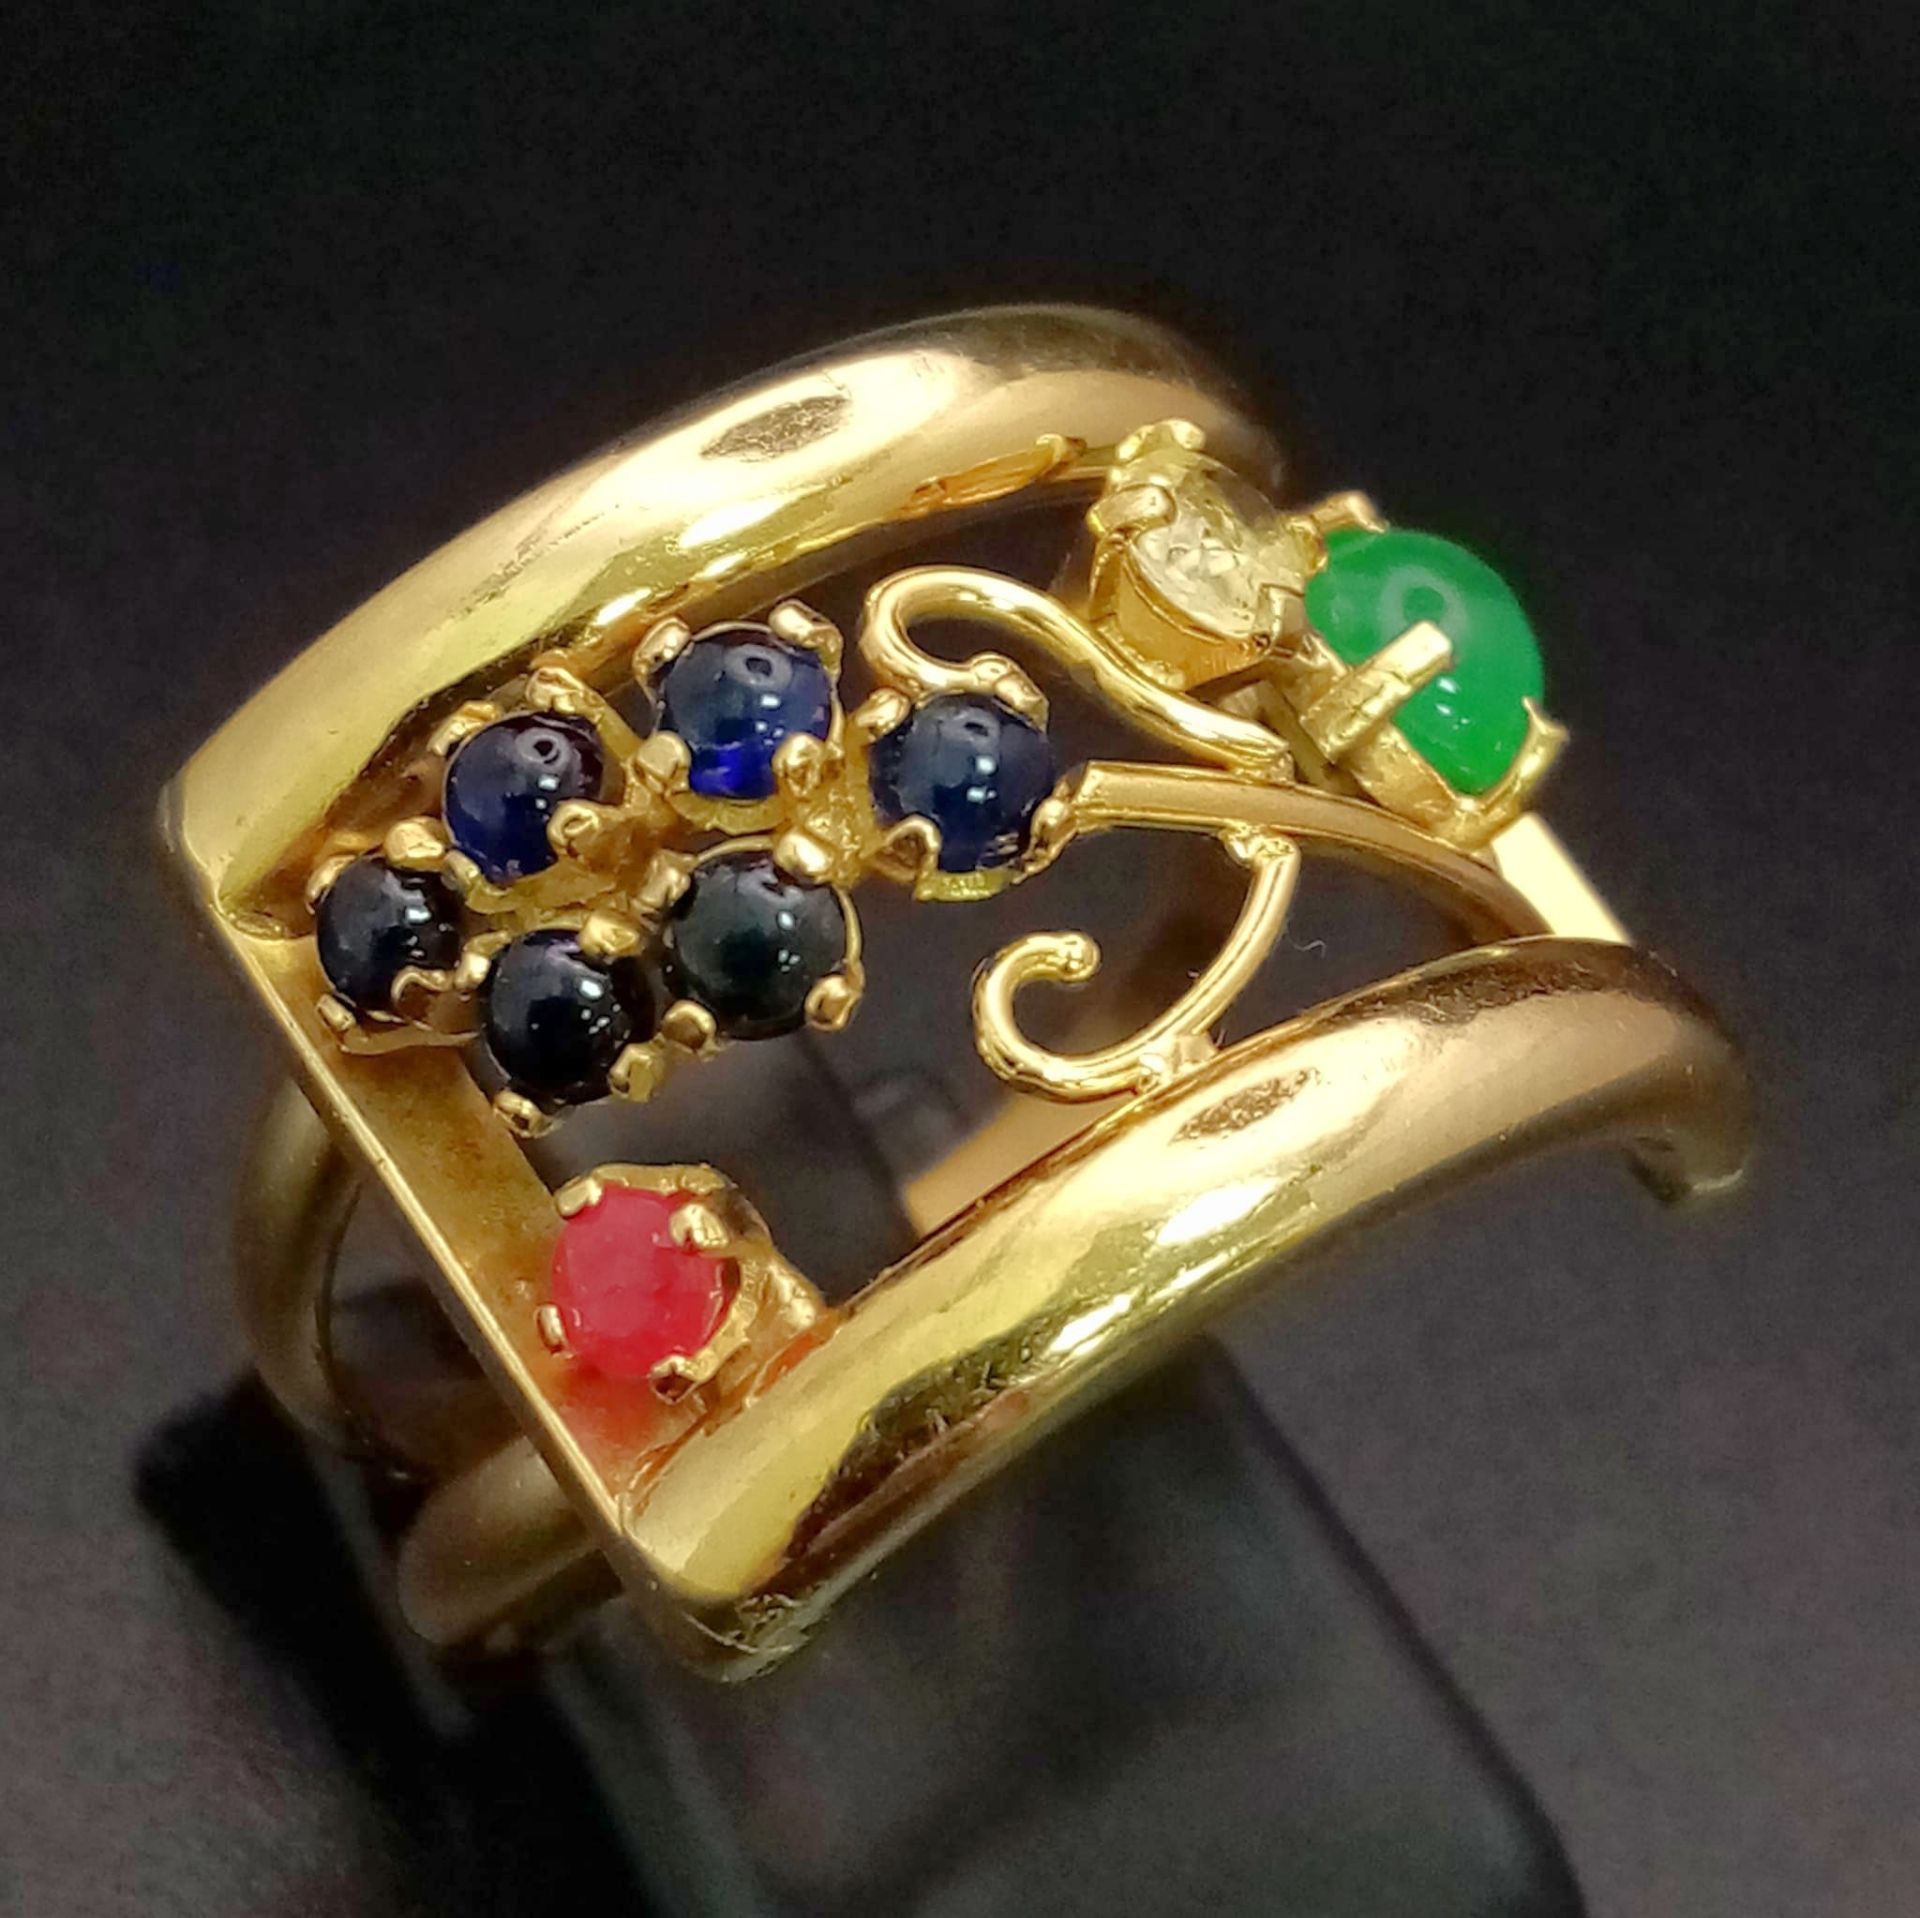 An 18 K yellow gold ring with an artistic design and adorned with an emerald cabochon, plus ruby, - Bild 2 aus 7